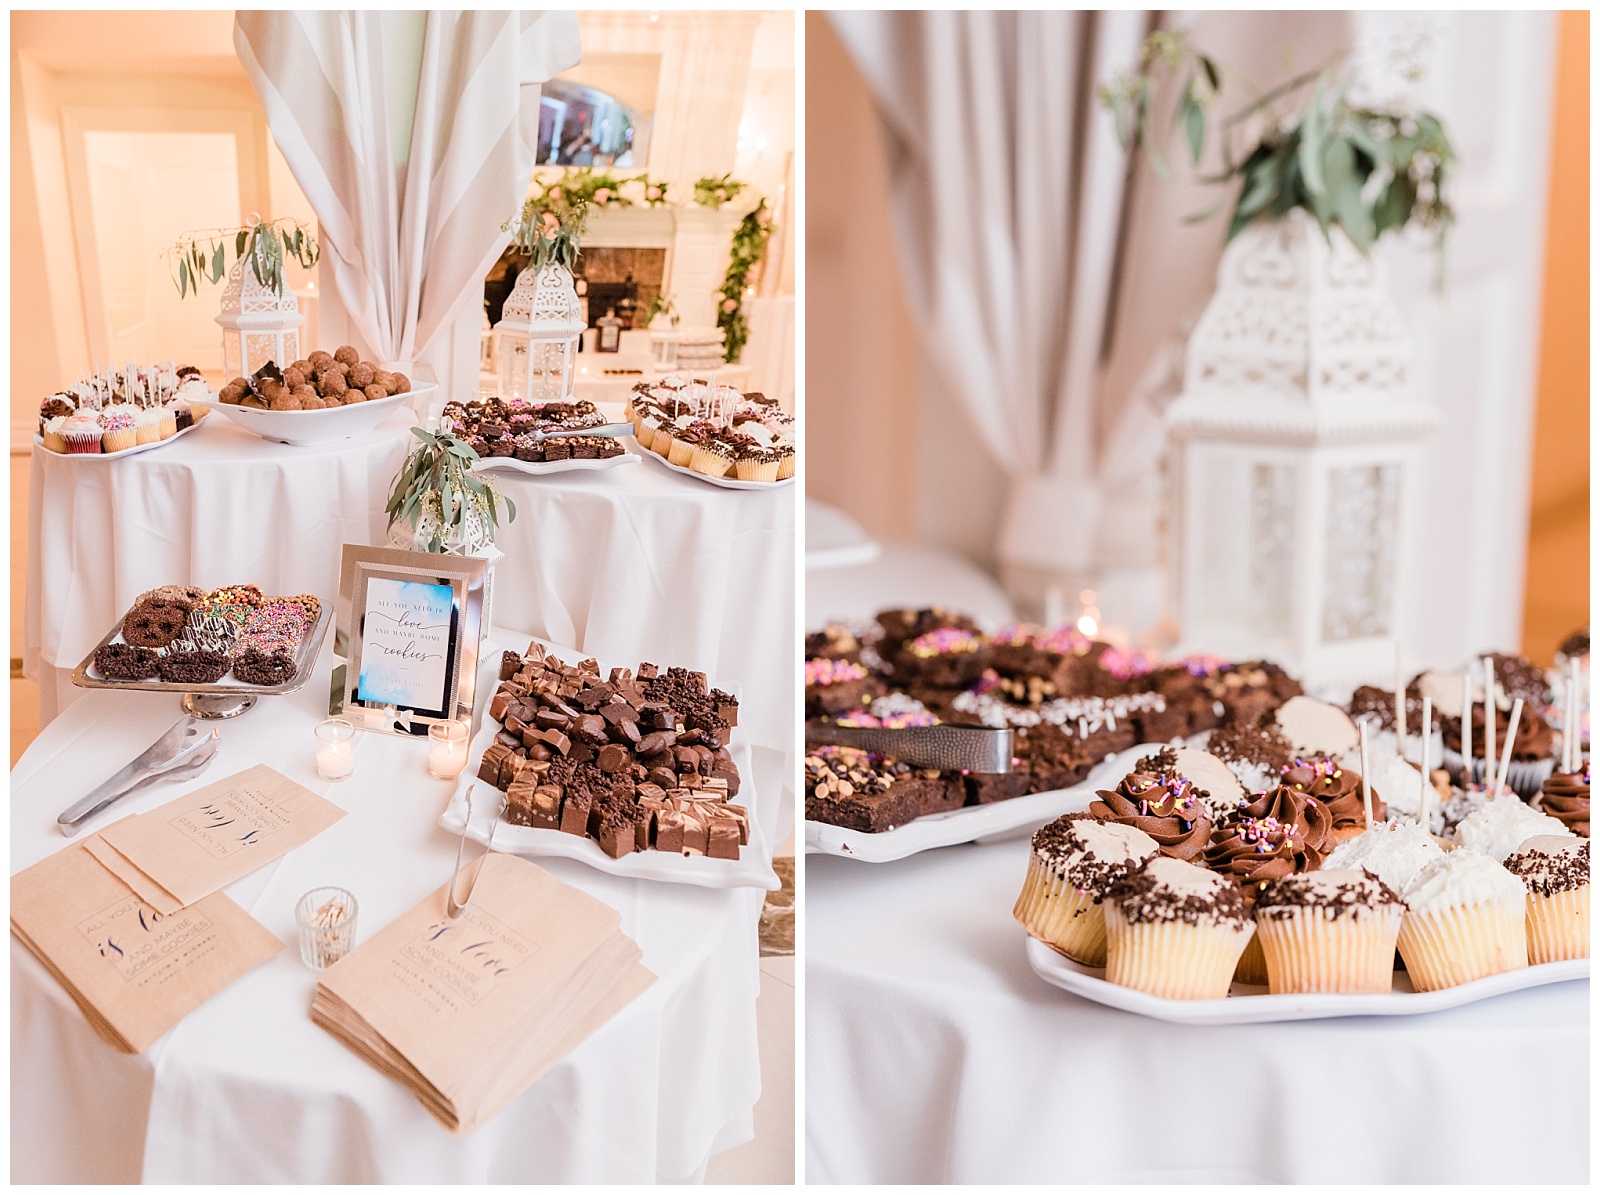 Desserts and pastries are arranged on plates for the dessert table.